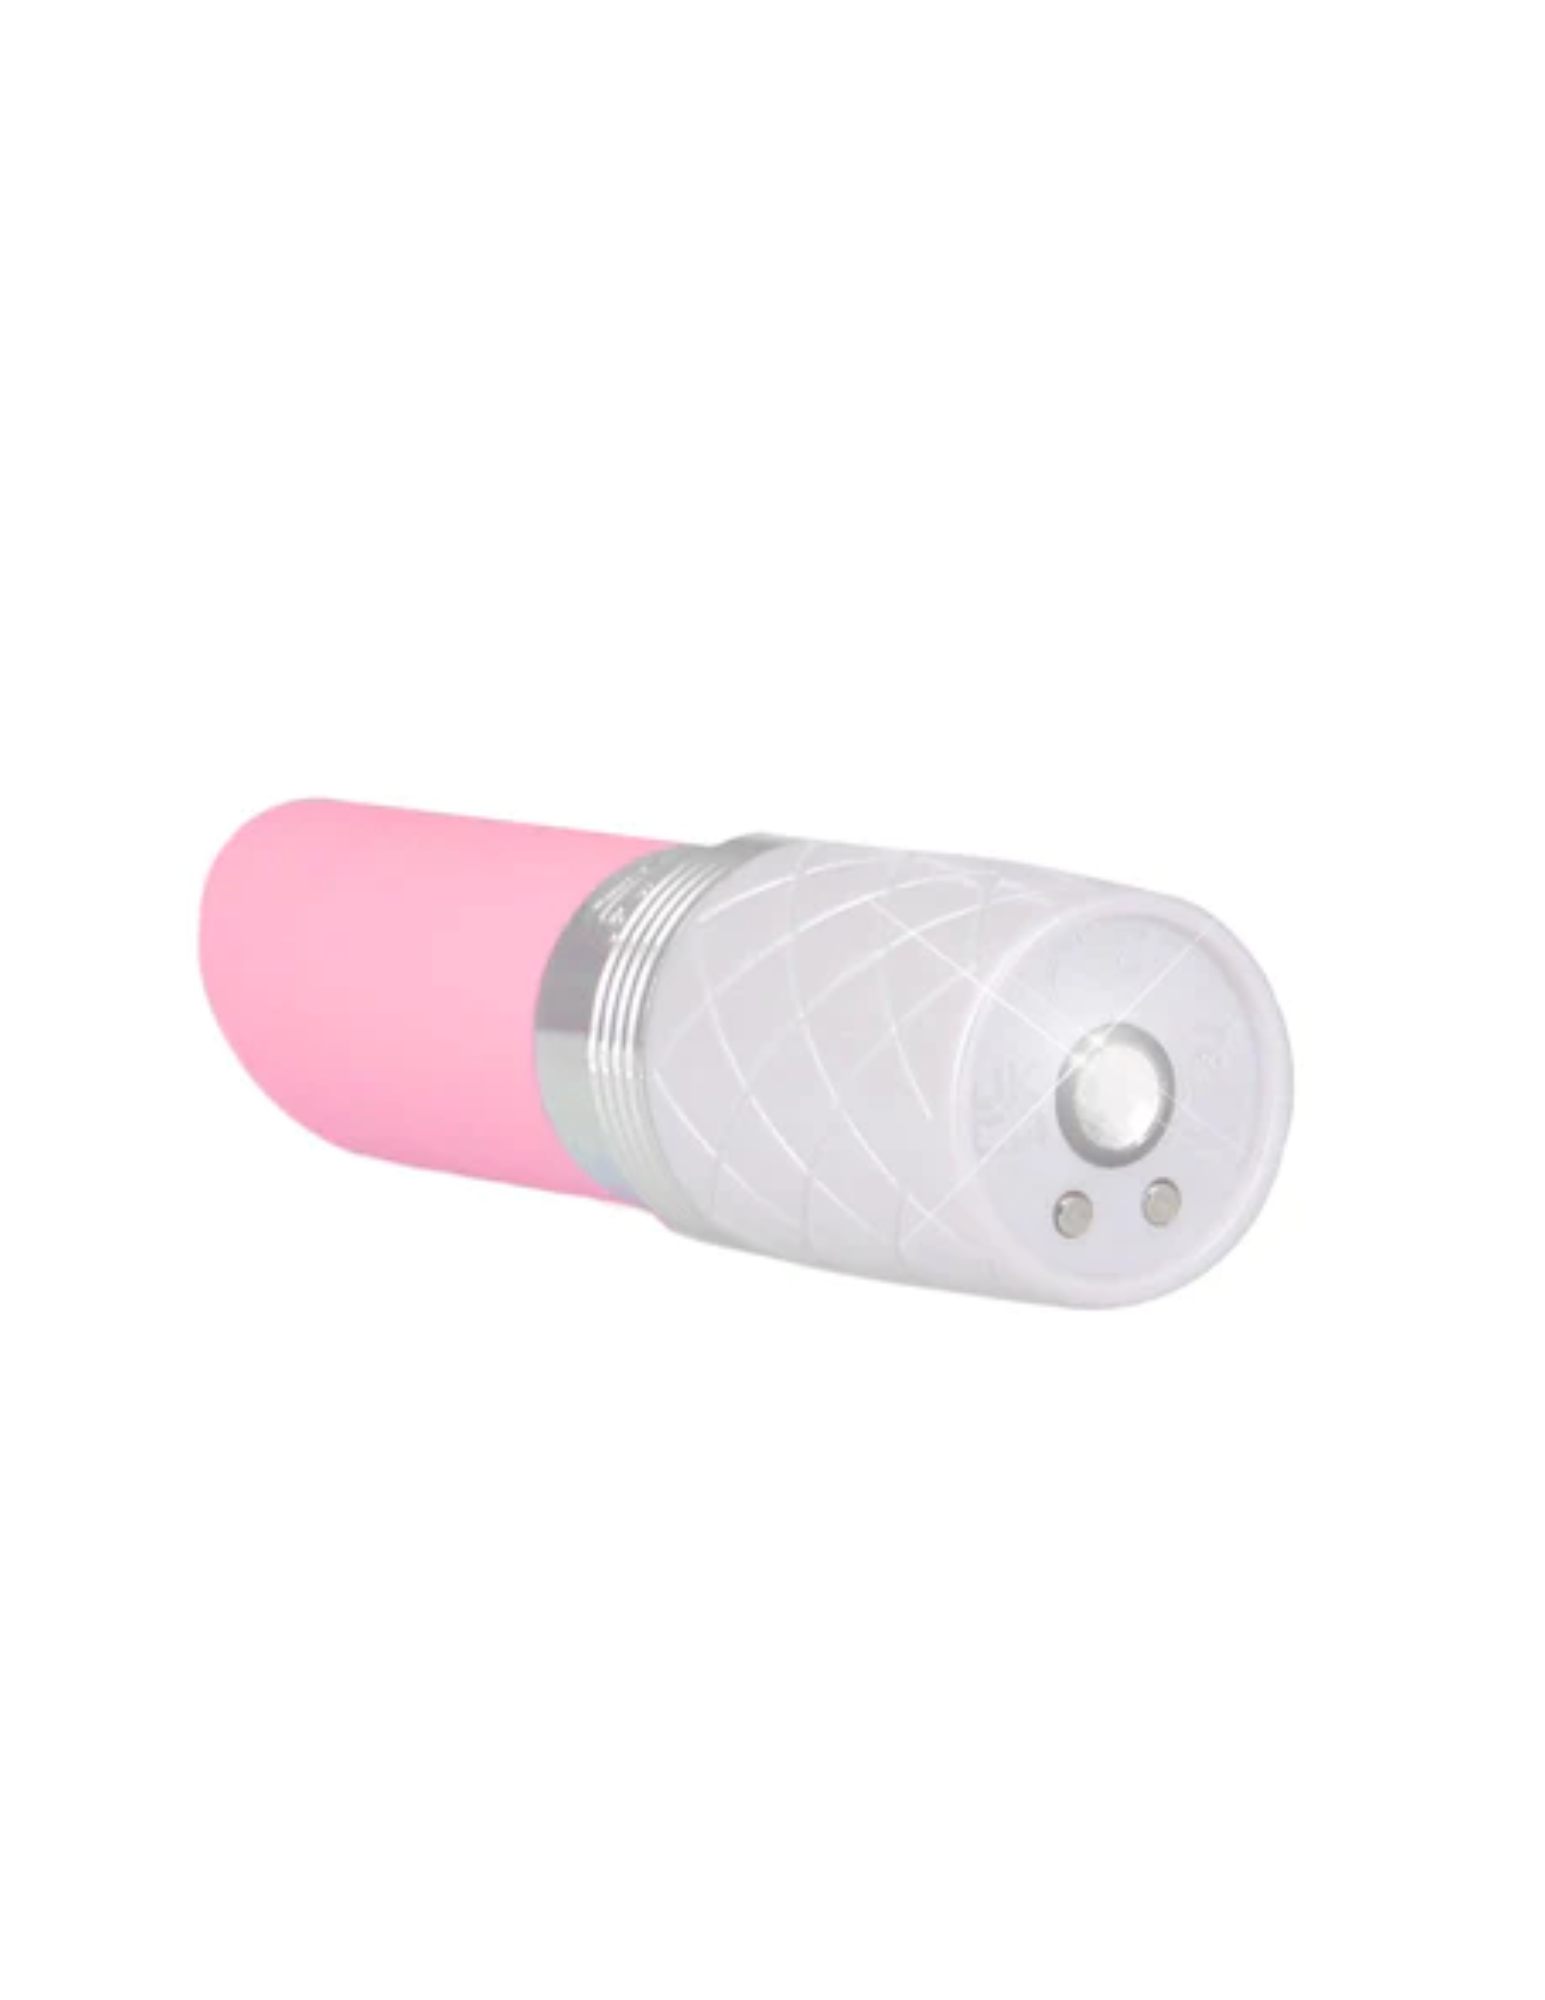 Back angle view of the Pillow Talk Lusty flicking vibrator (pink) shows off its Swarovski power and control button at the base.